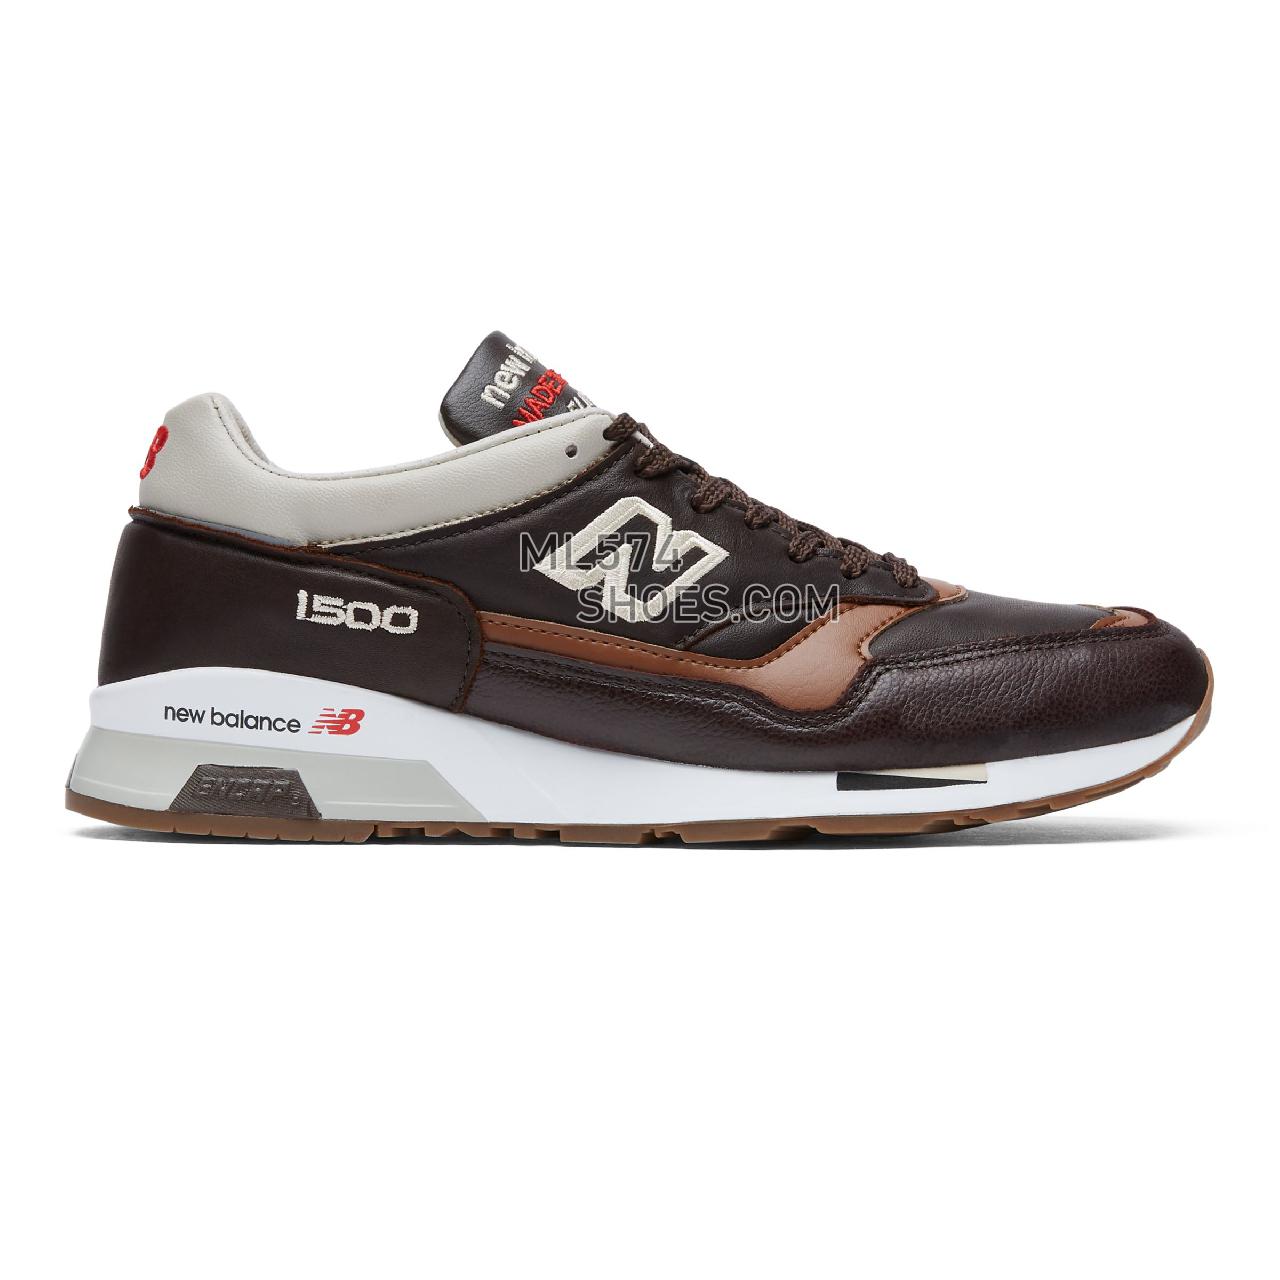 New Balance Made in UK 1500 - Men's Made in UK 1500 Classic ML1500V1-27392-M - Brown with Tan and Off White - M1500GNB